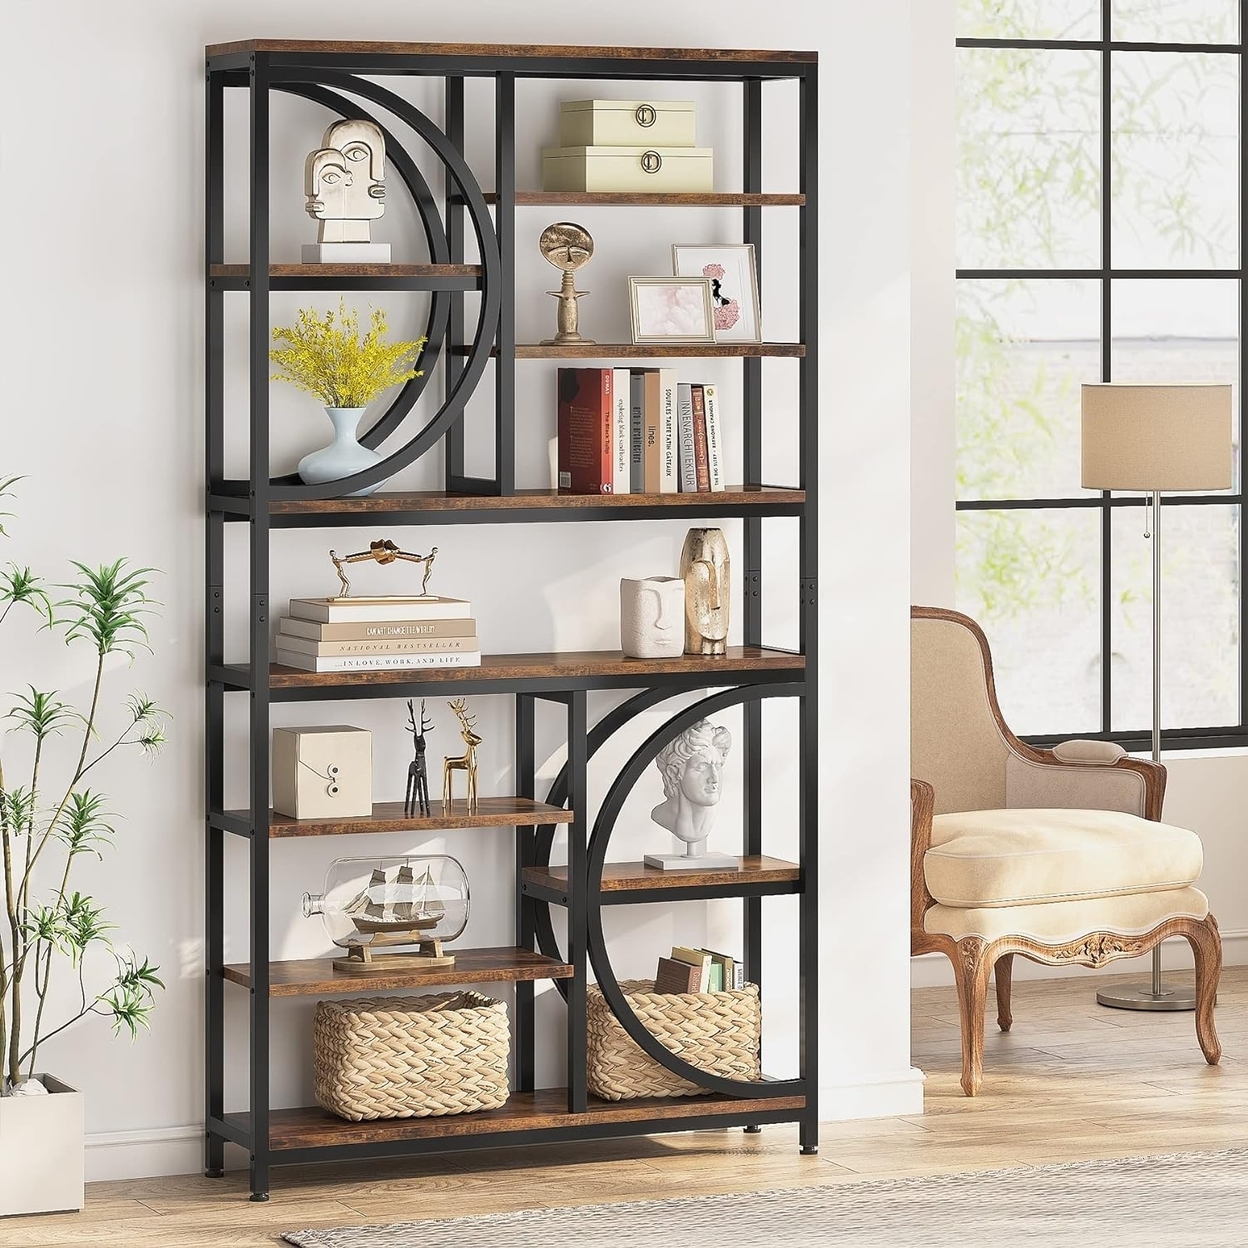 Tribesigns Industrial 8-Tier Etagere Bookcases, 77 Tall Book Shelf Open Display Shelves, Wood Look Accent Shelving Unit With Metal Frame -